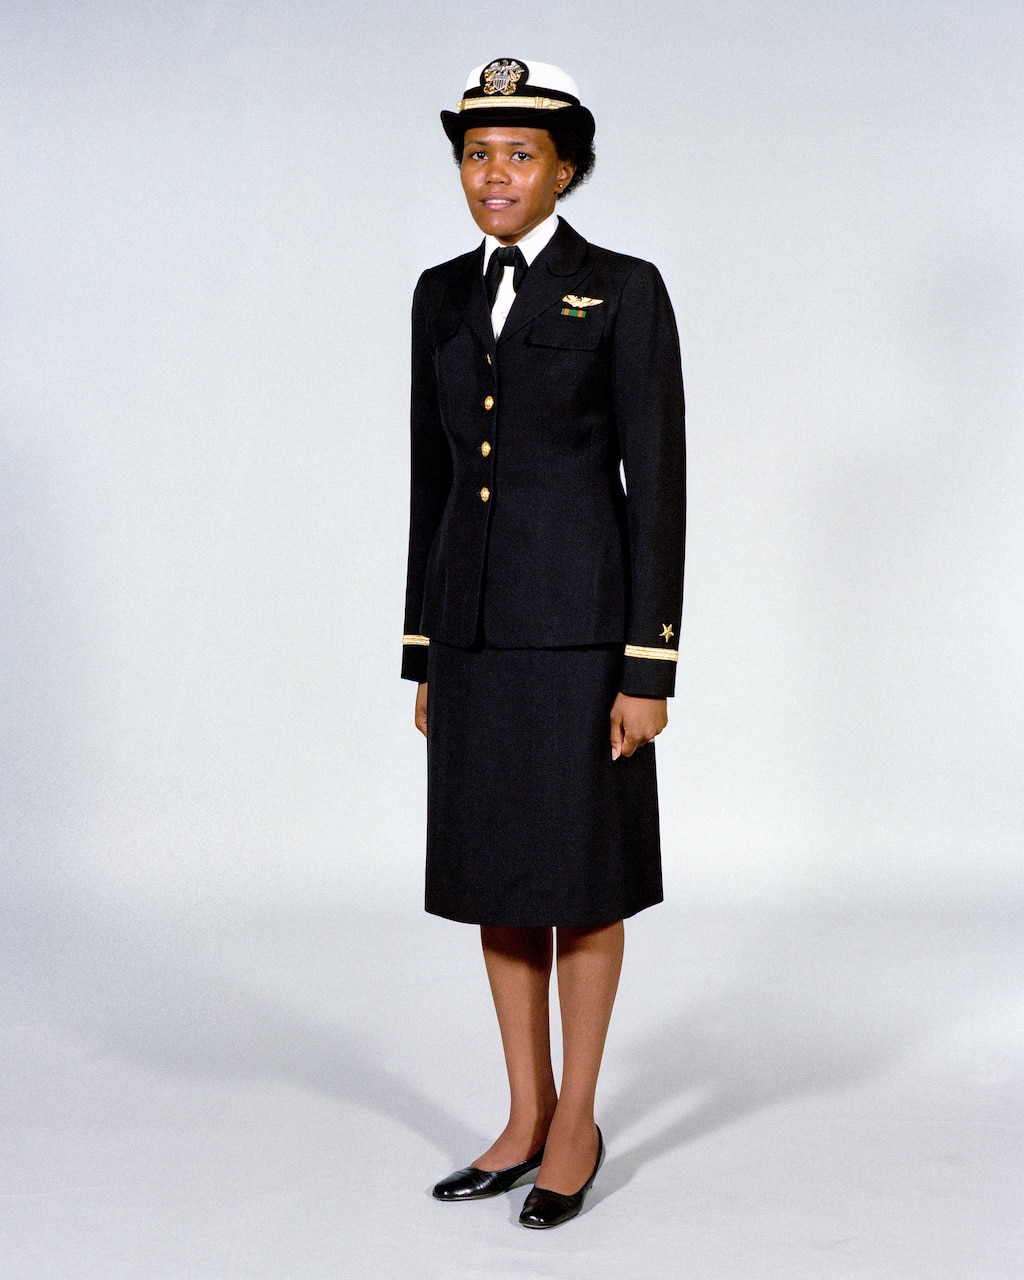 Female service dress uniform for officers, 1984. Note the gold buttons that distinguish the officer from lower-grade enlisted Sailors, who wore silver buttons.